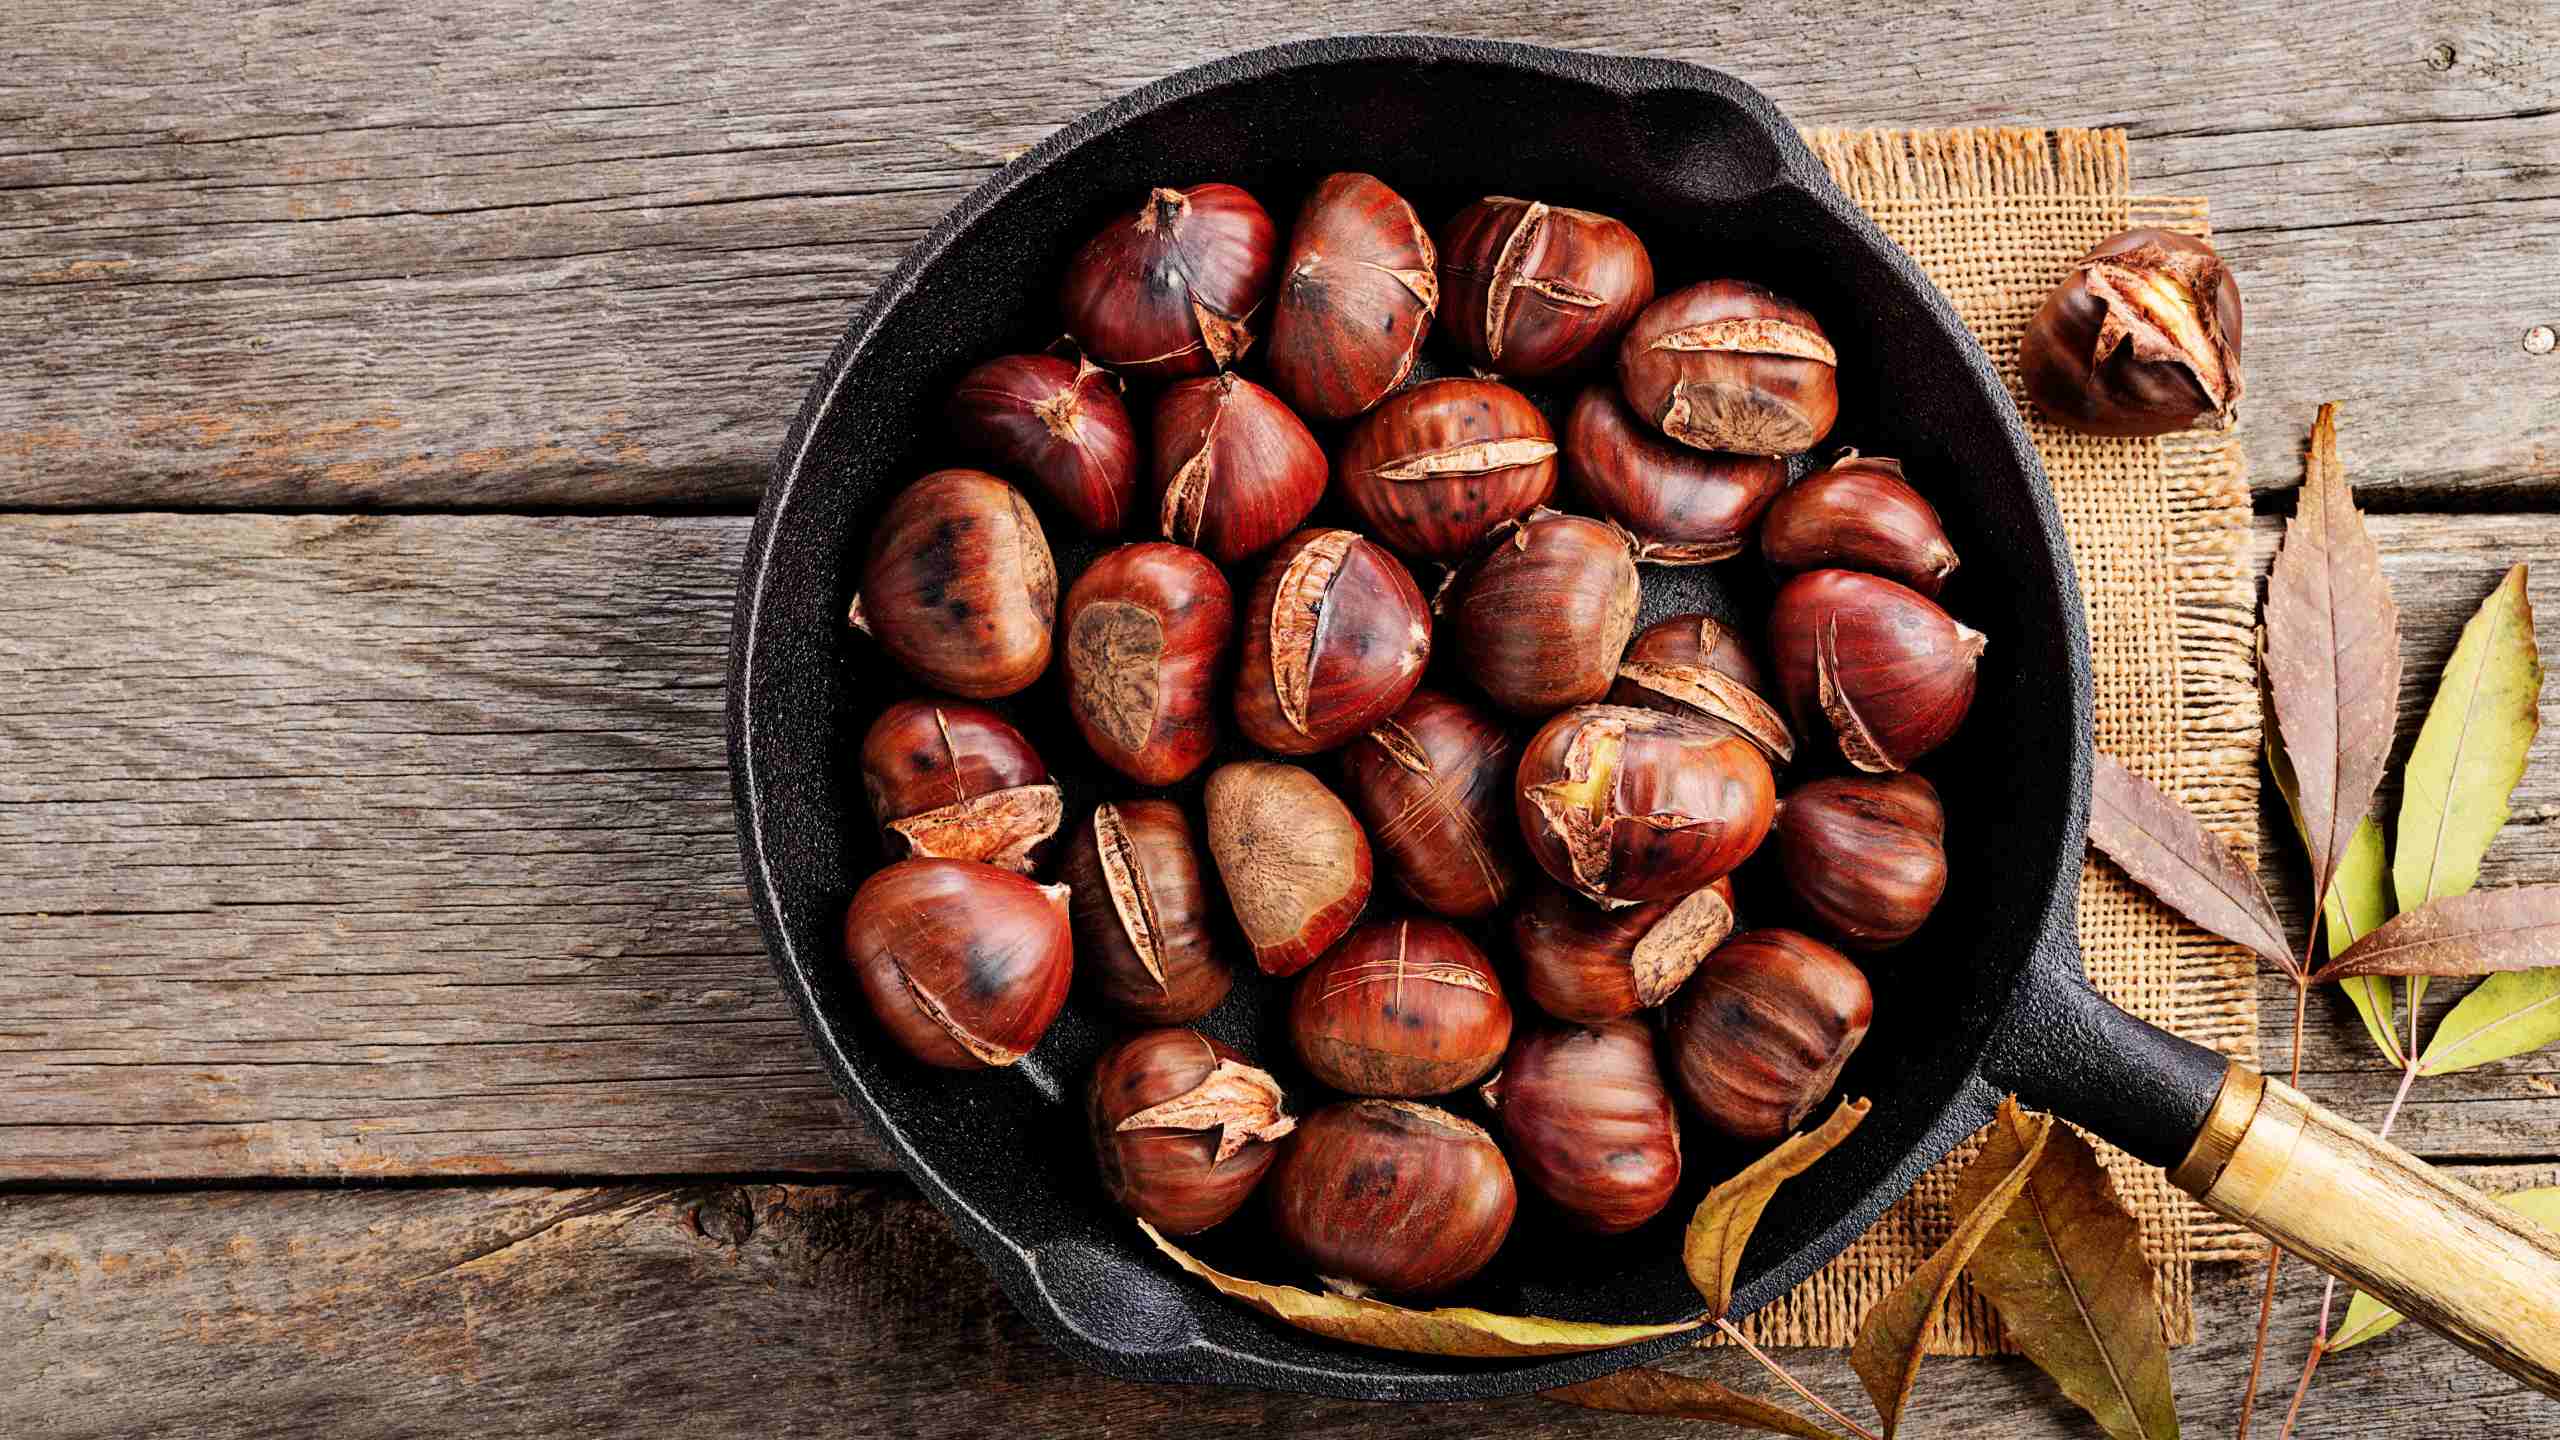 Chestnuts, roasted and tasty!